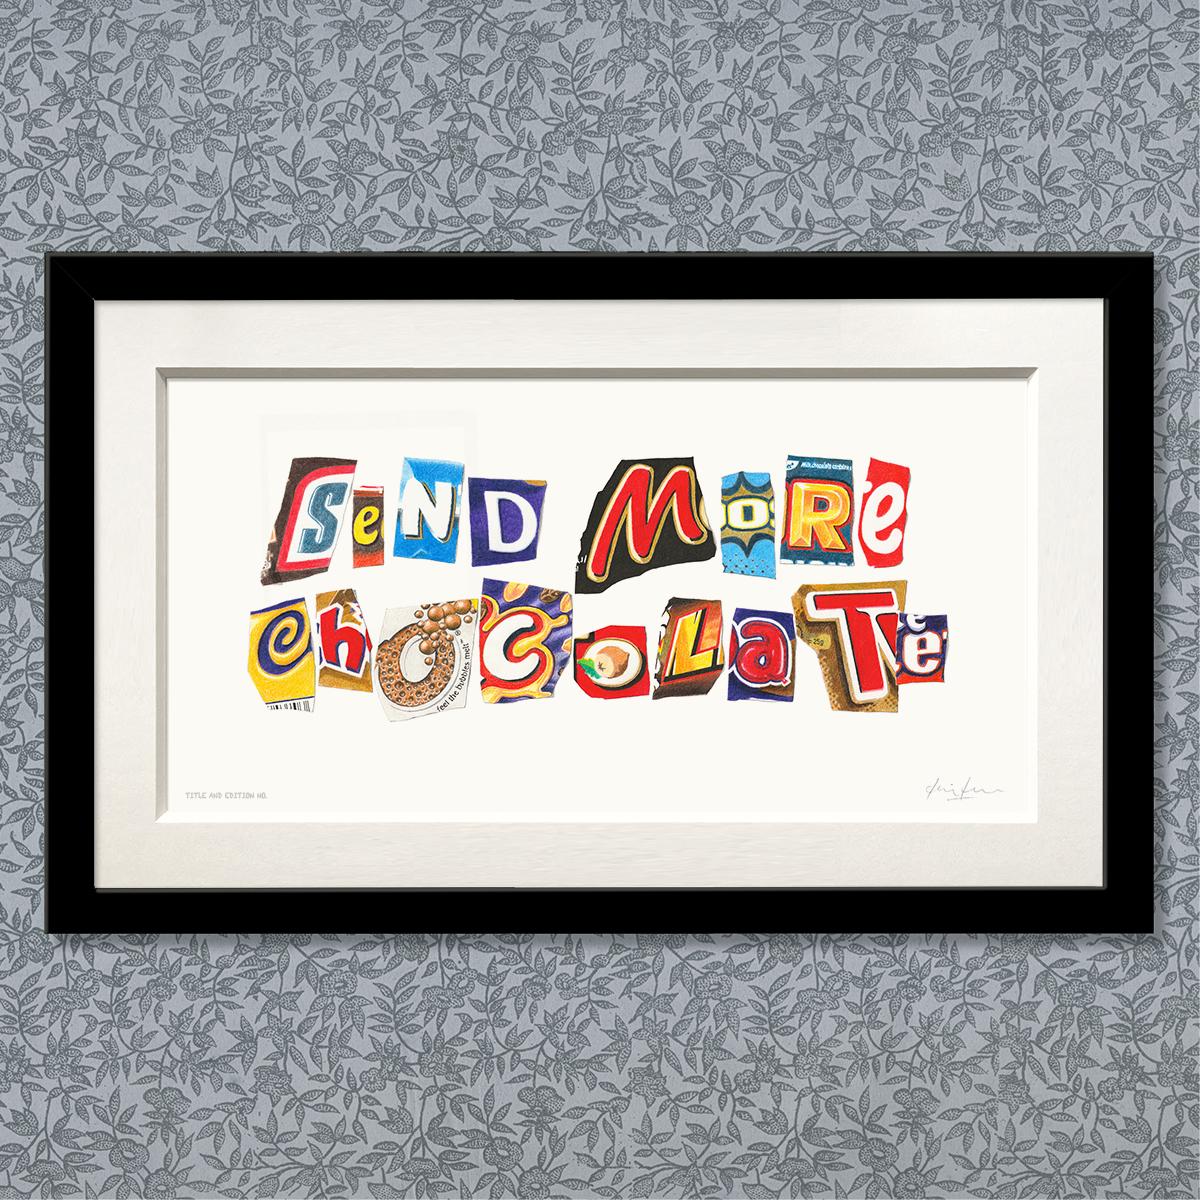 Limited edition print (large version) of drawing of cut-out letters - Send More Chocolate - in a black frame.